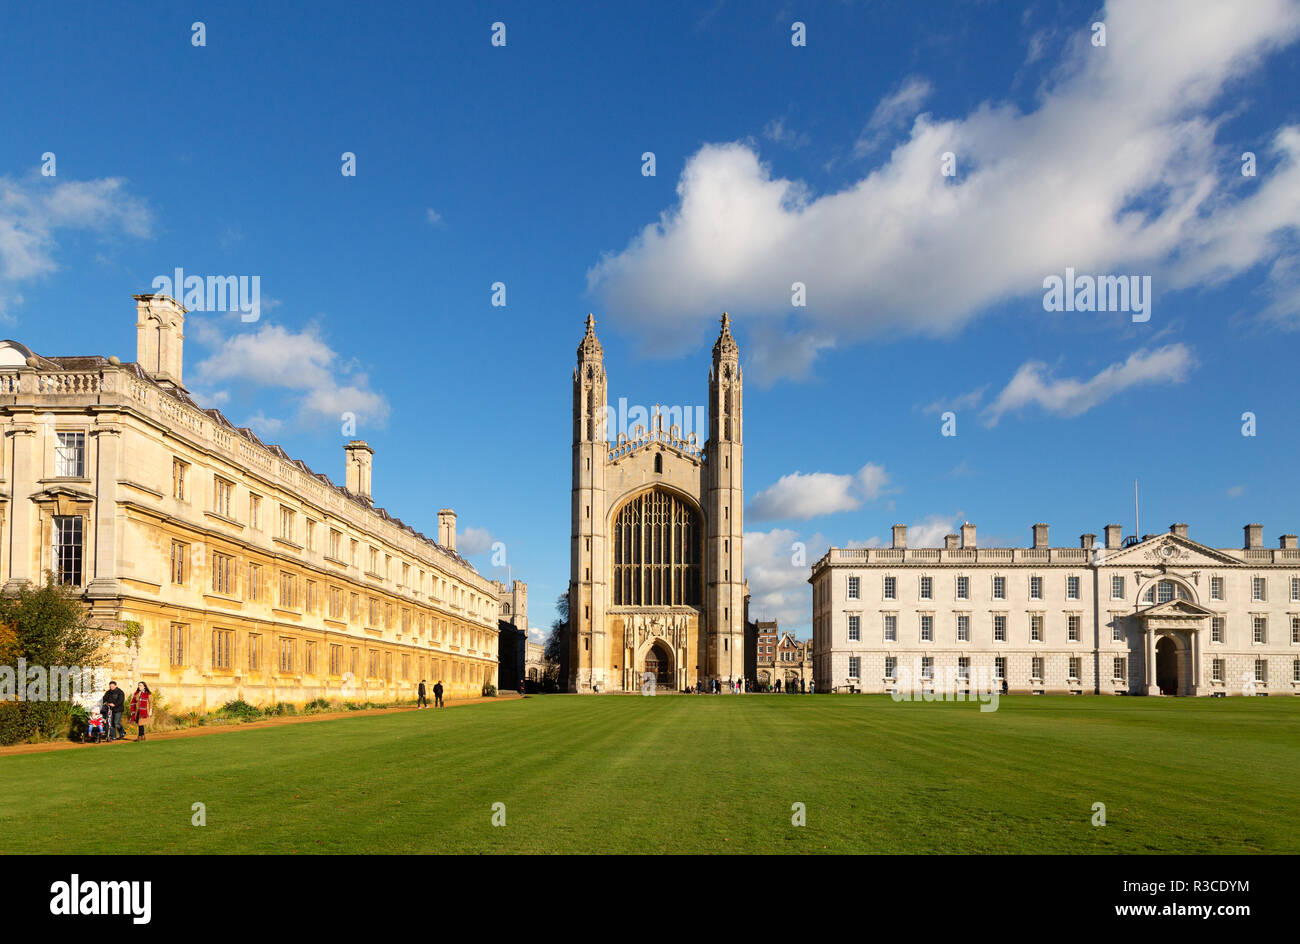 Kings College Chapel Cambridge with the Gibbs building to the right and Clare College to the left; Cambridge University colleges, Cambridge UK Stock Photo